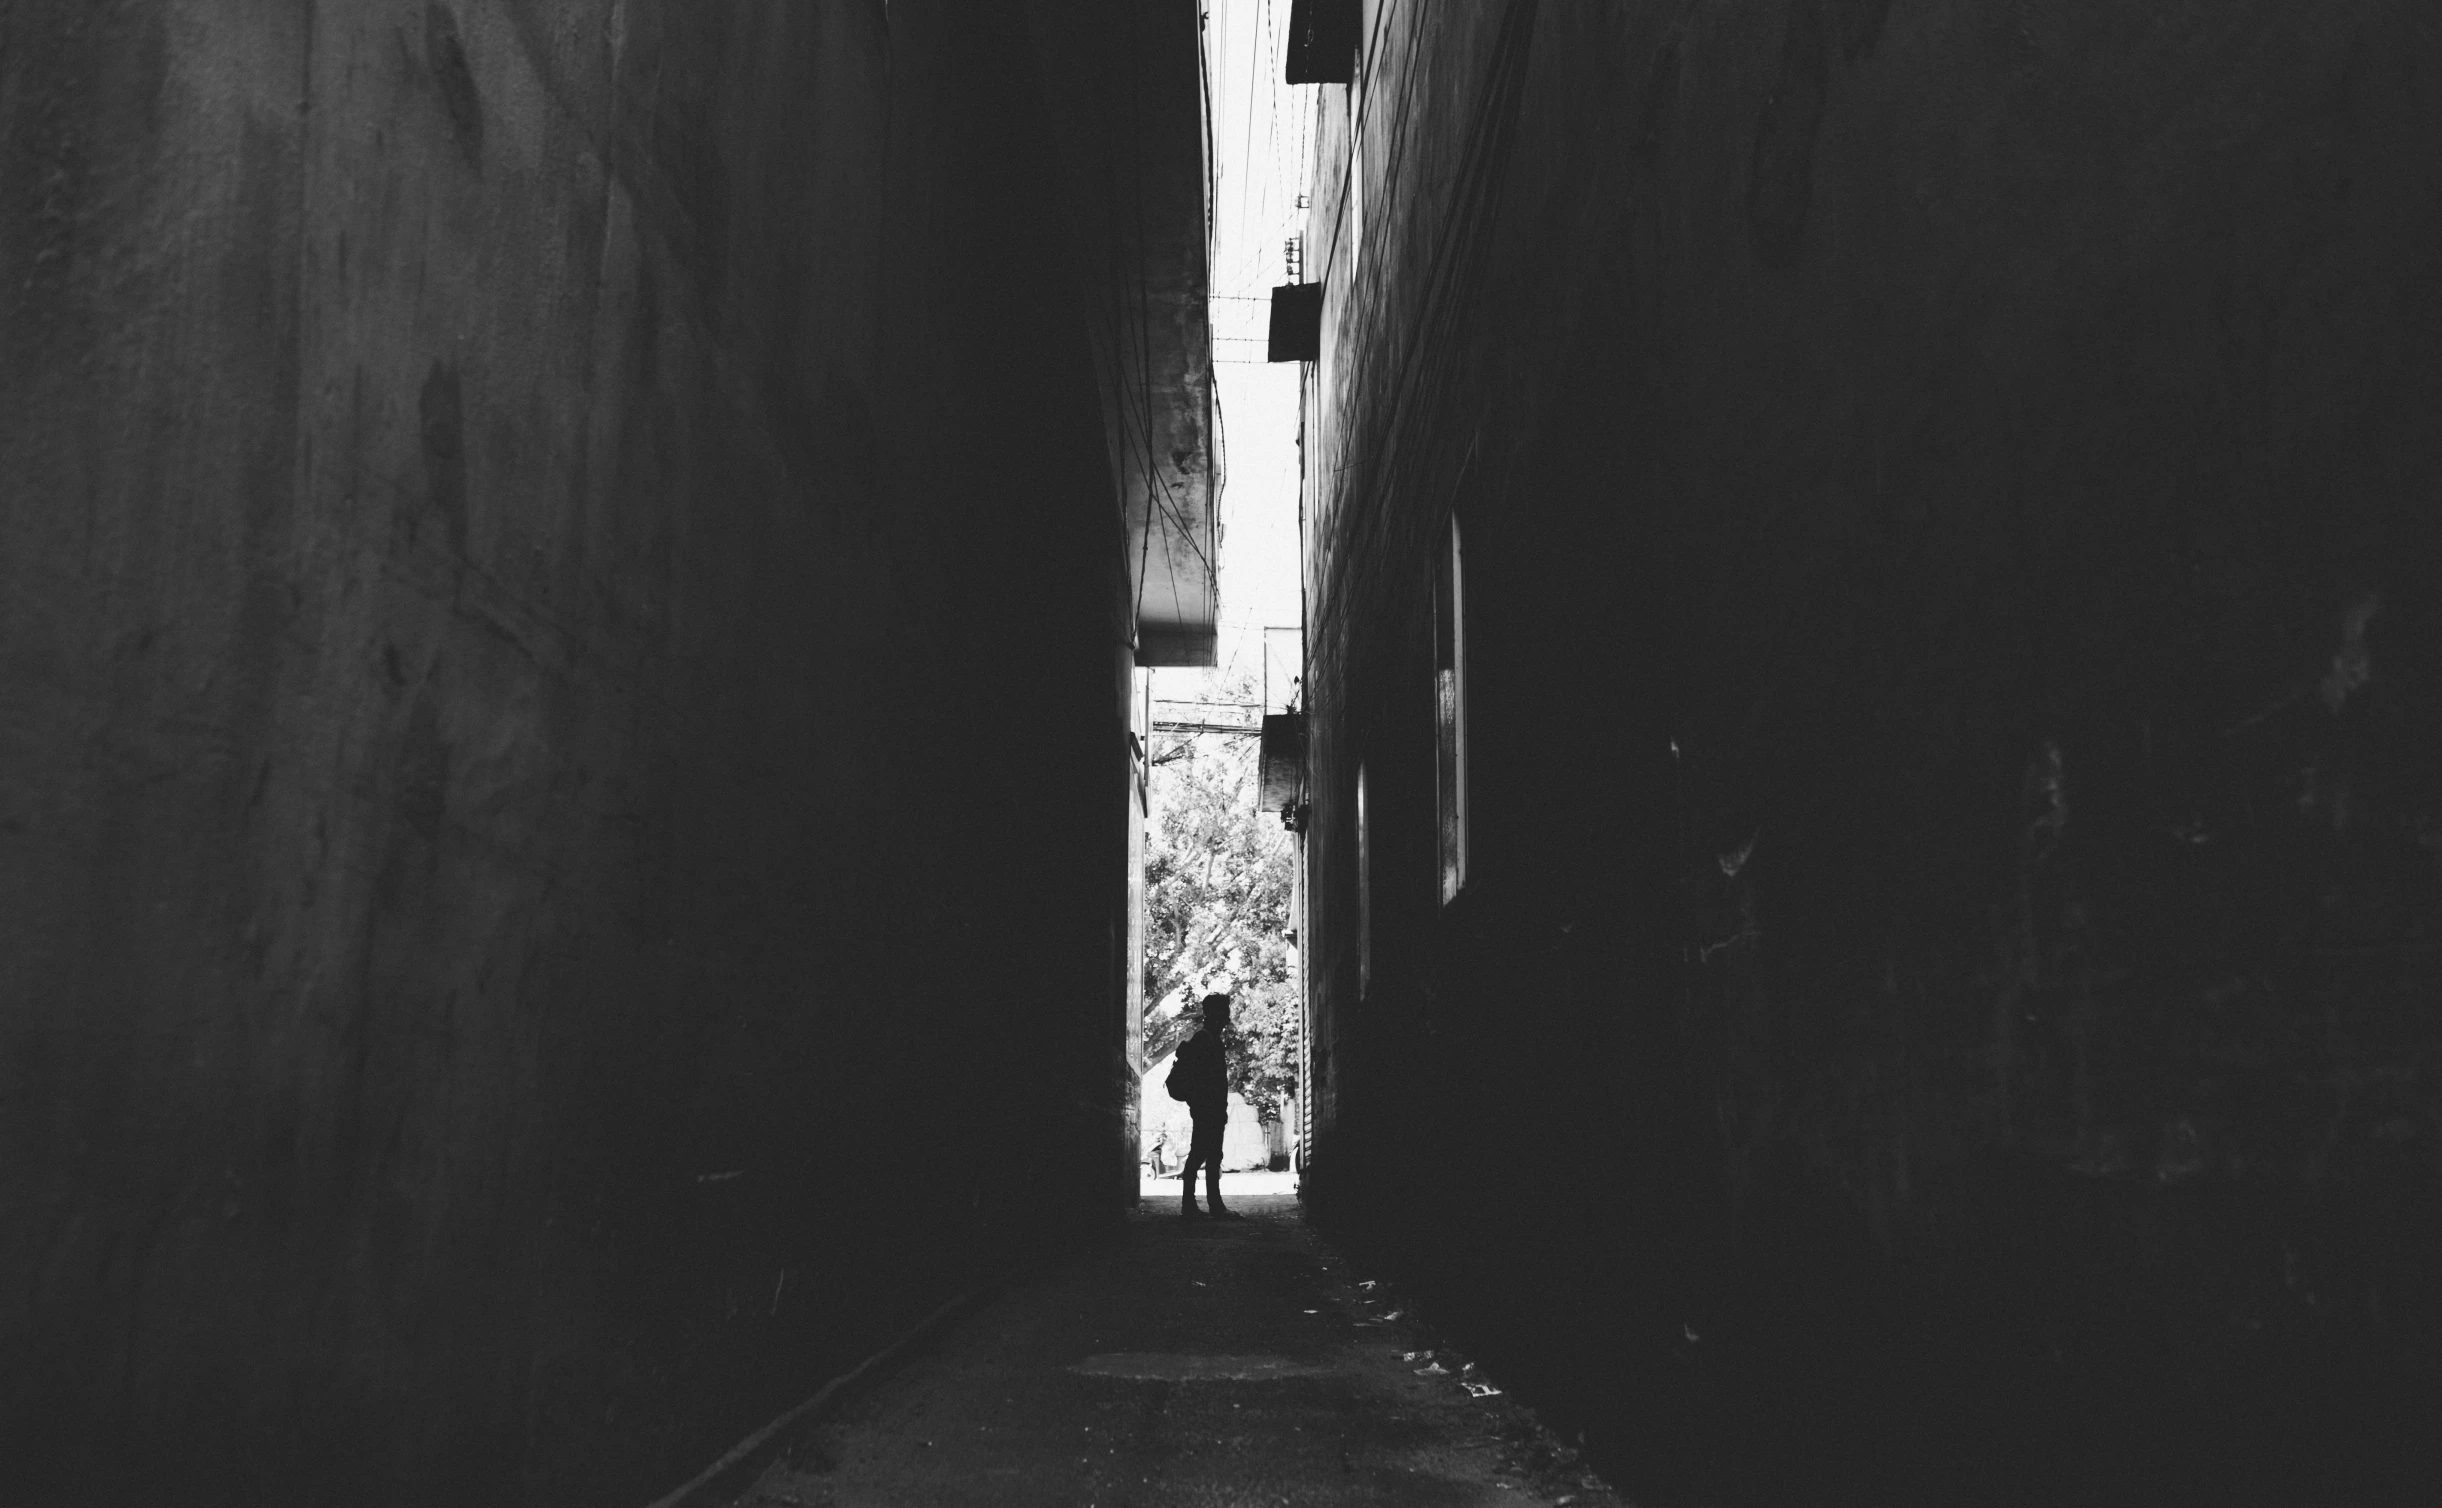 the alley way is dimly lit by sunlight